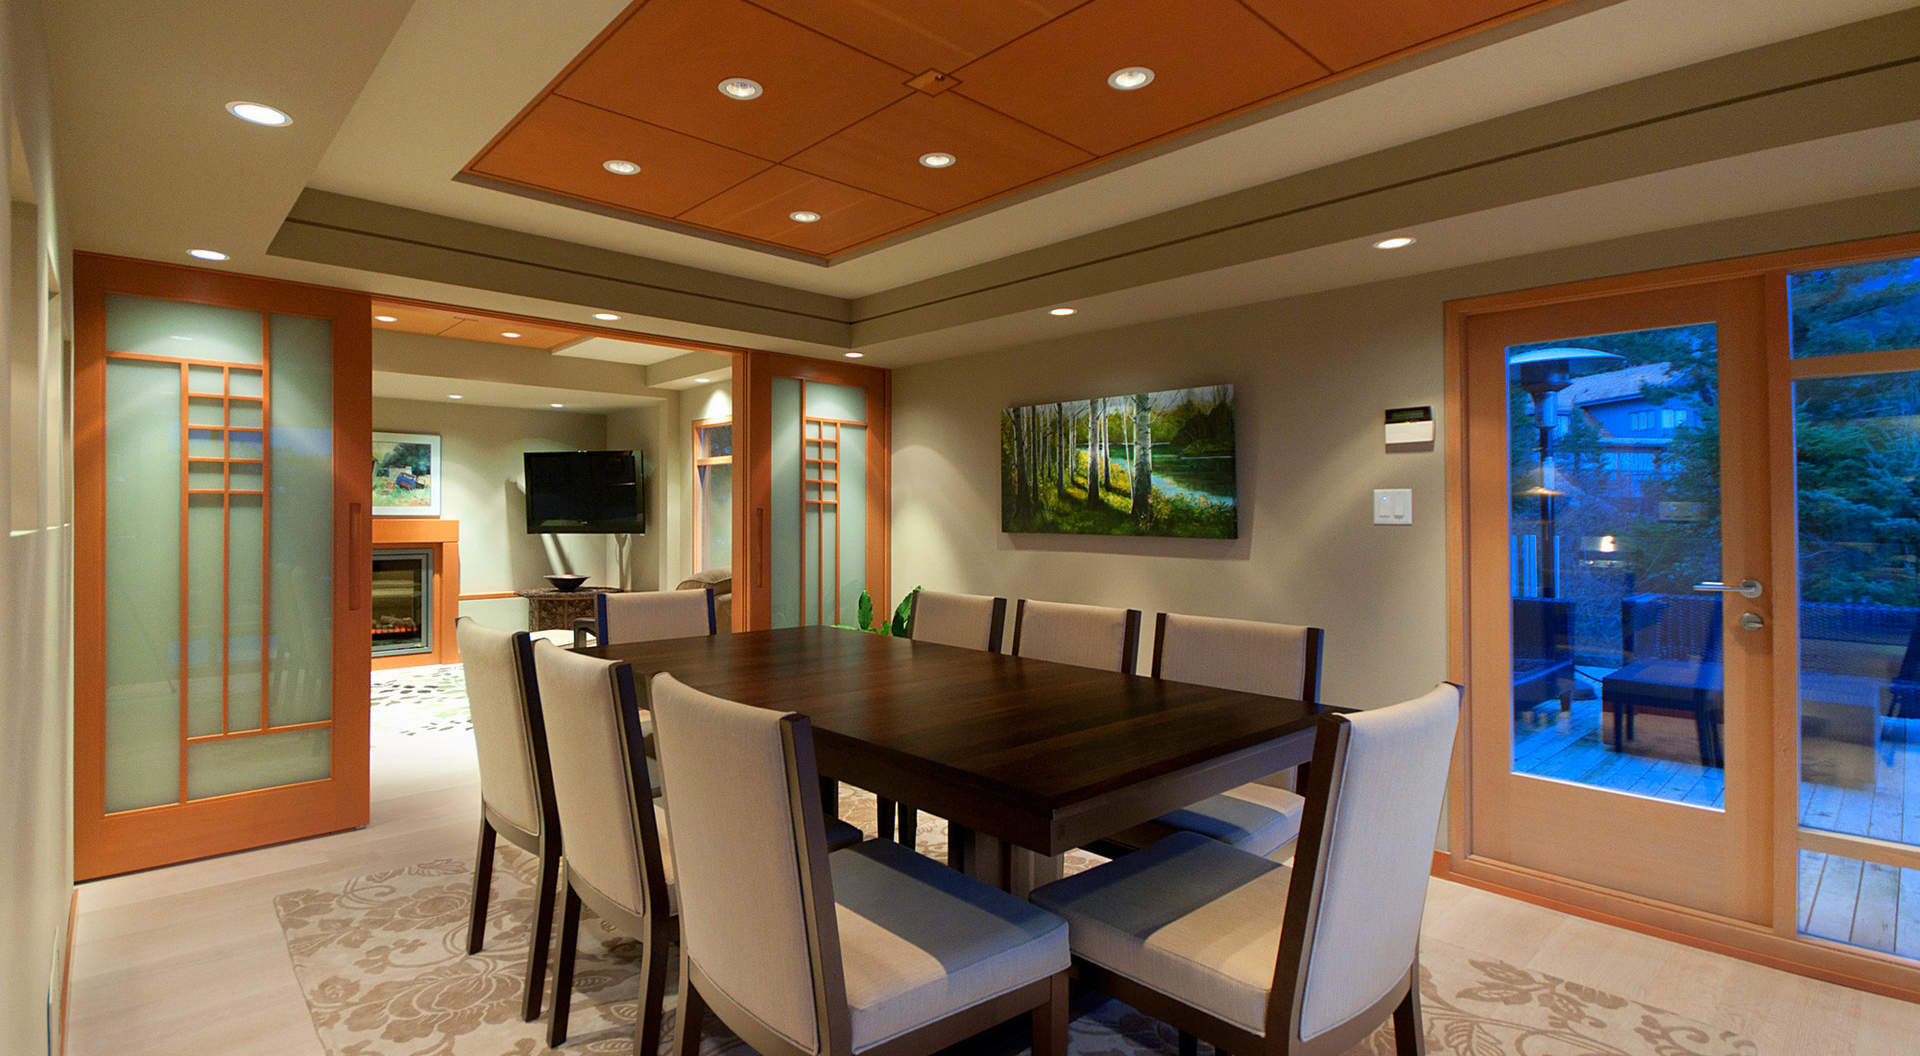 Fabulous Dining Room with Architectural Ceiling Detail